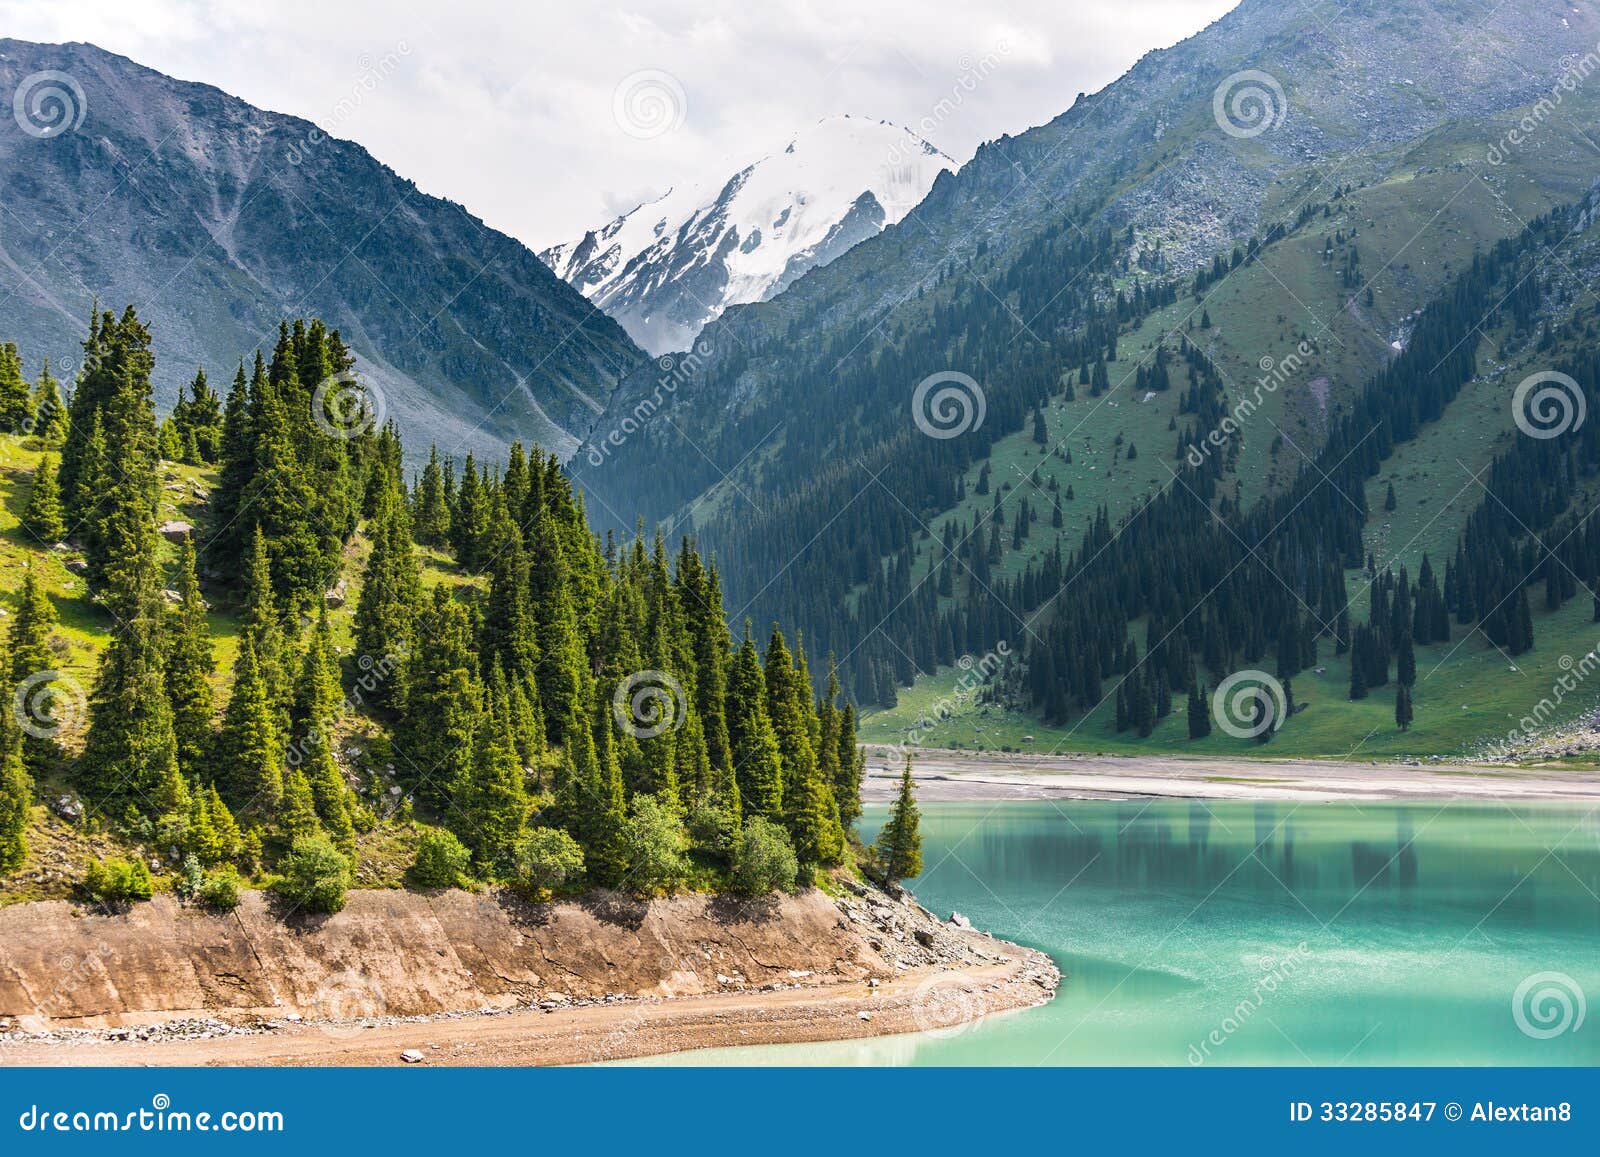 Landscape Mountain Lake Central Asia Royalty Free Stock Photography